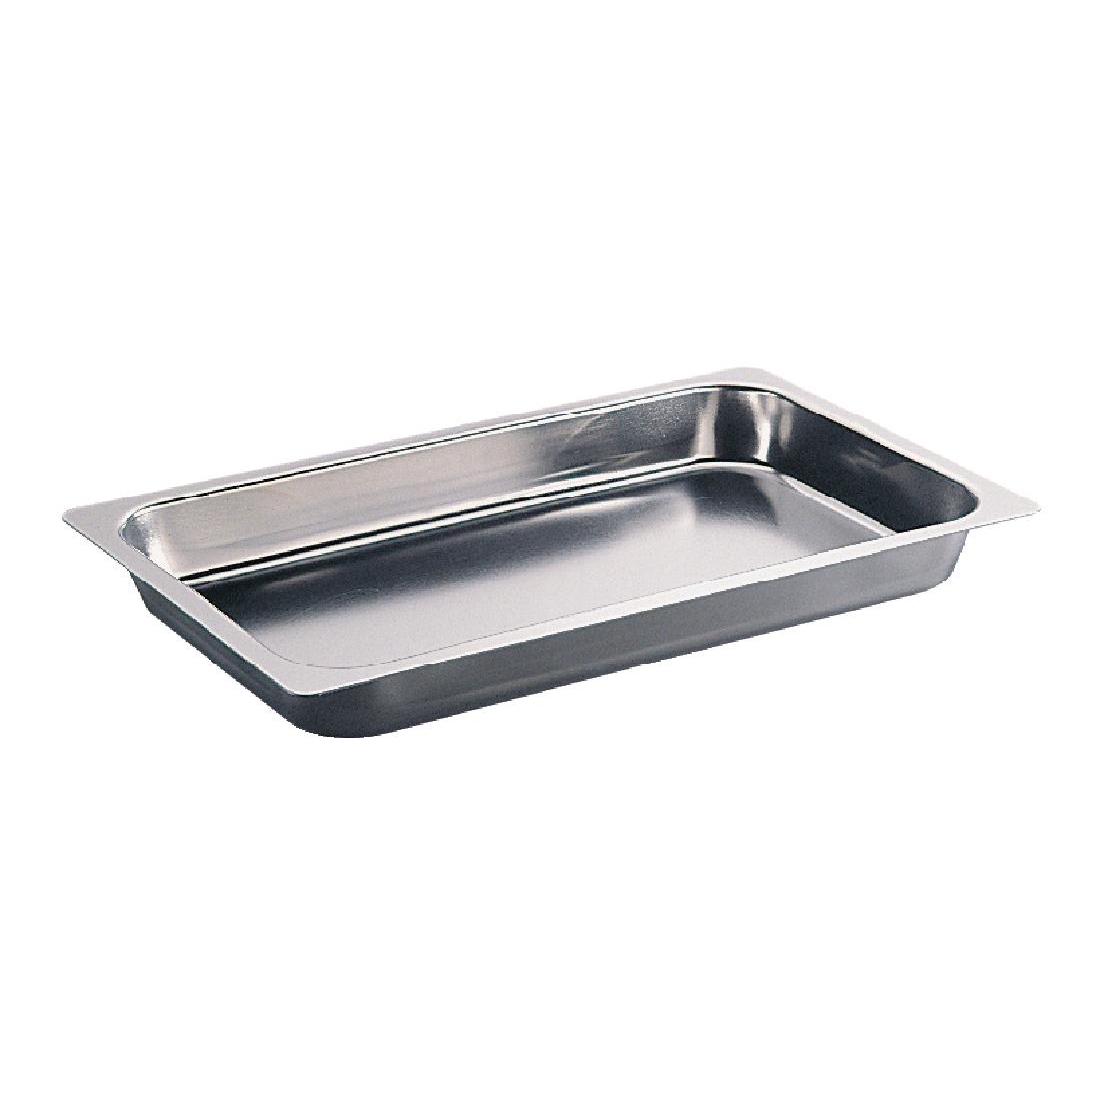 Bourgeat Gastronorm 1/1 Stainless Steel Roasting Dish